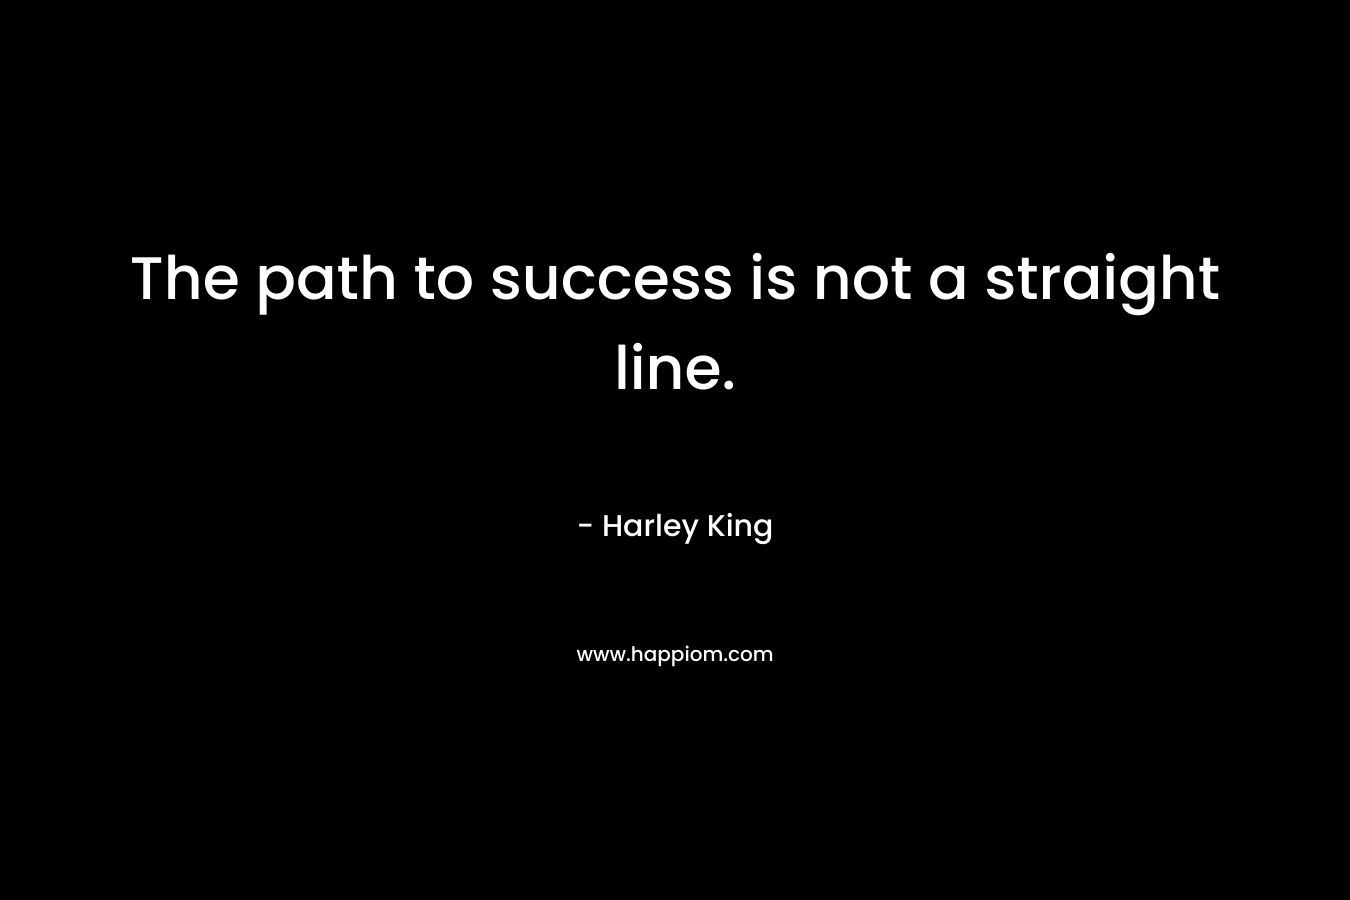 The path to success is not a straight line. – Harley King